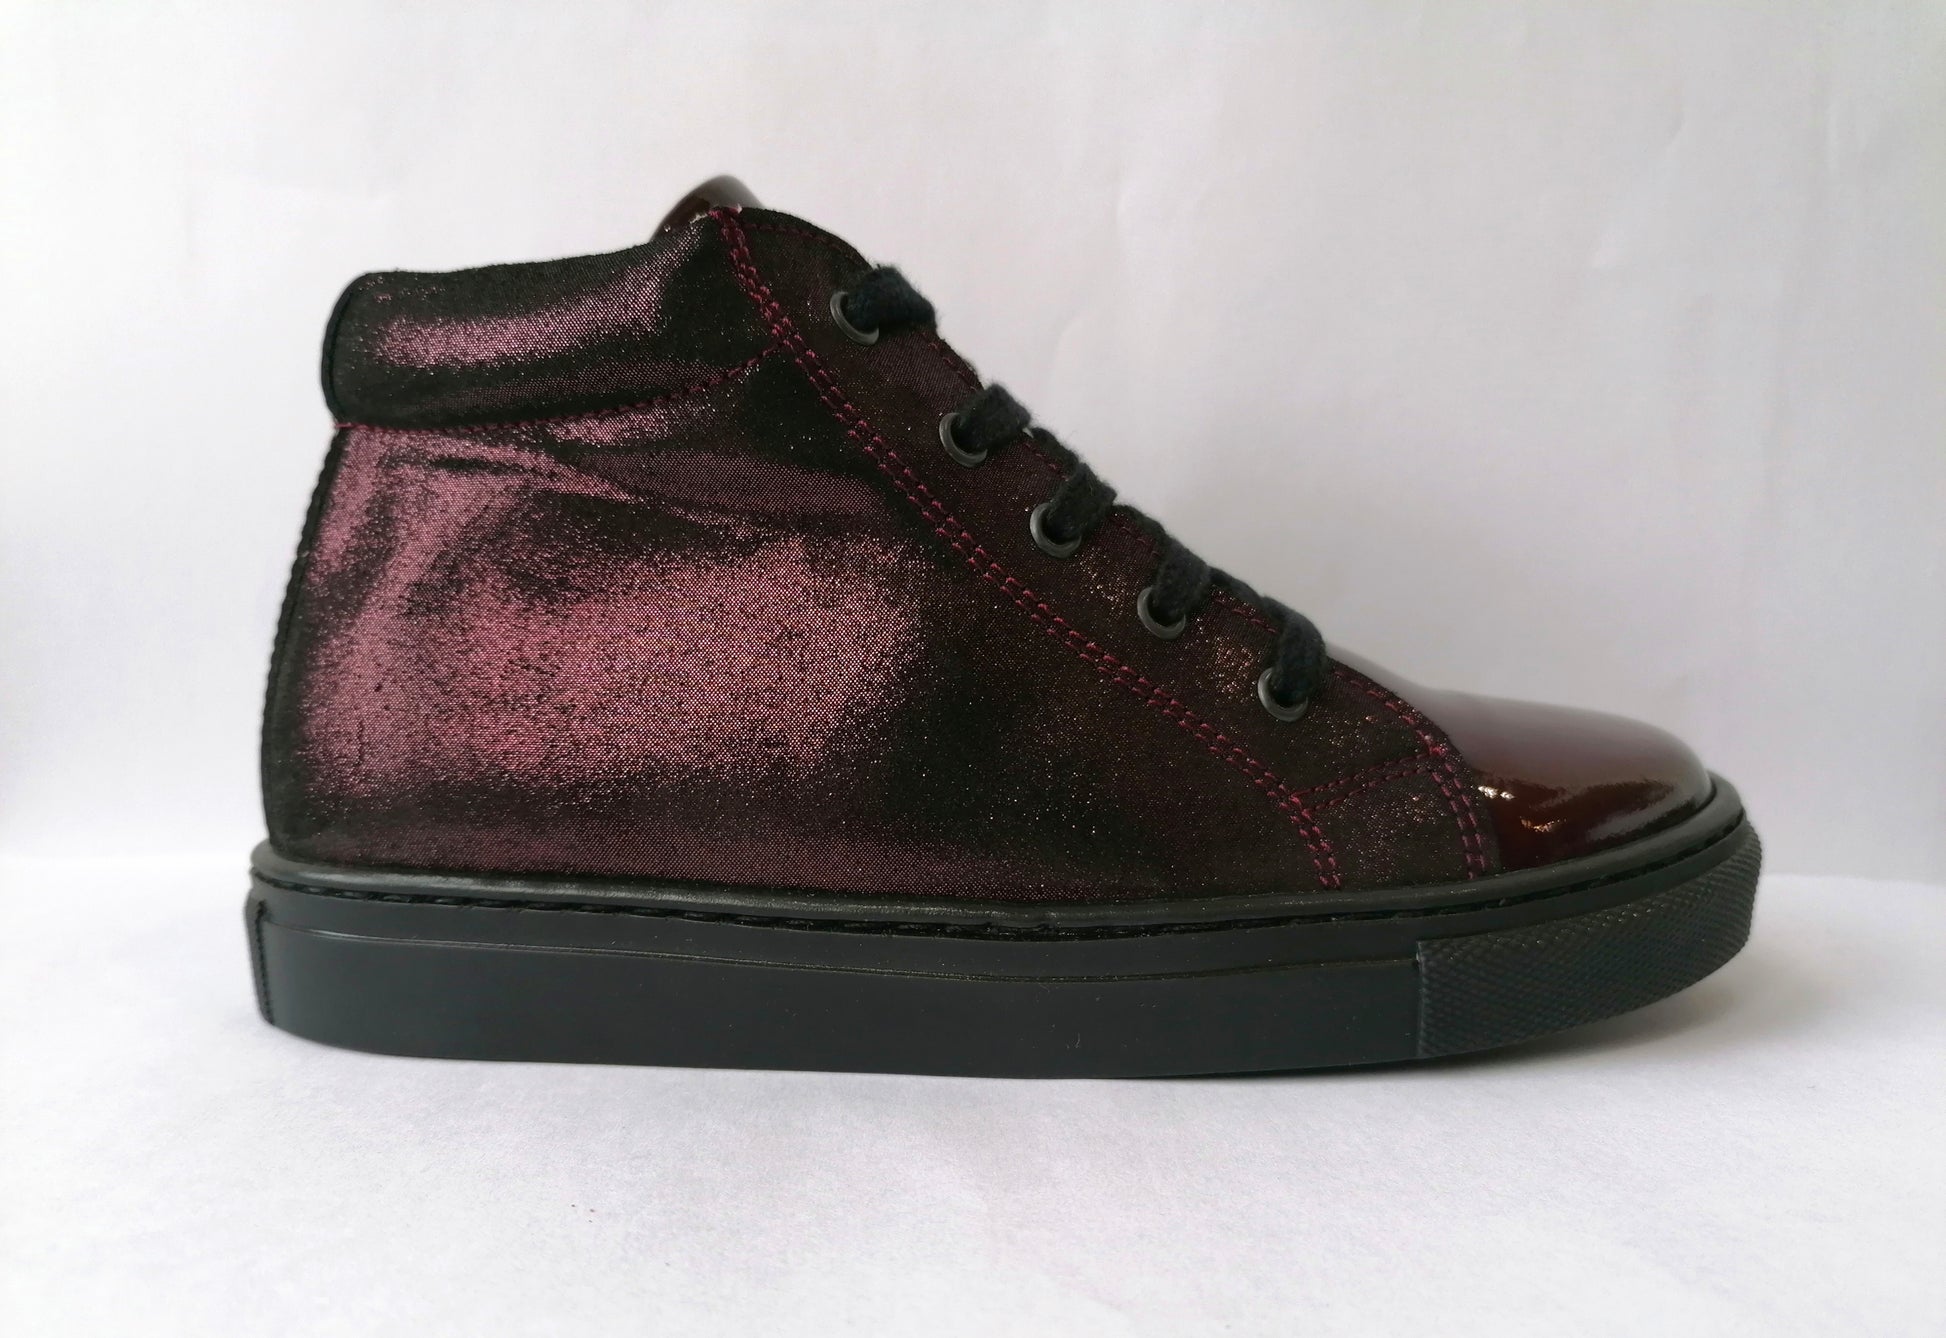 A girls casual boot by Petasil, style Gracie 2, in burgundy patent and glitter nubuck with lace and zip fastening. Right side view.